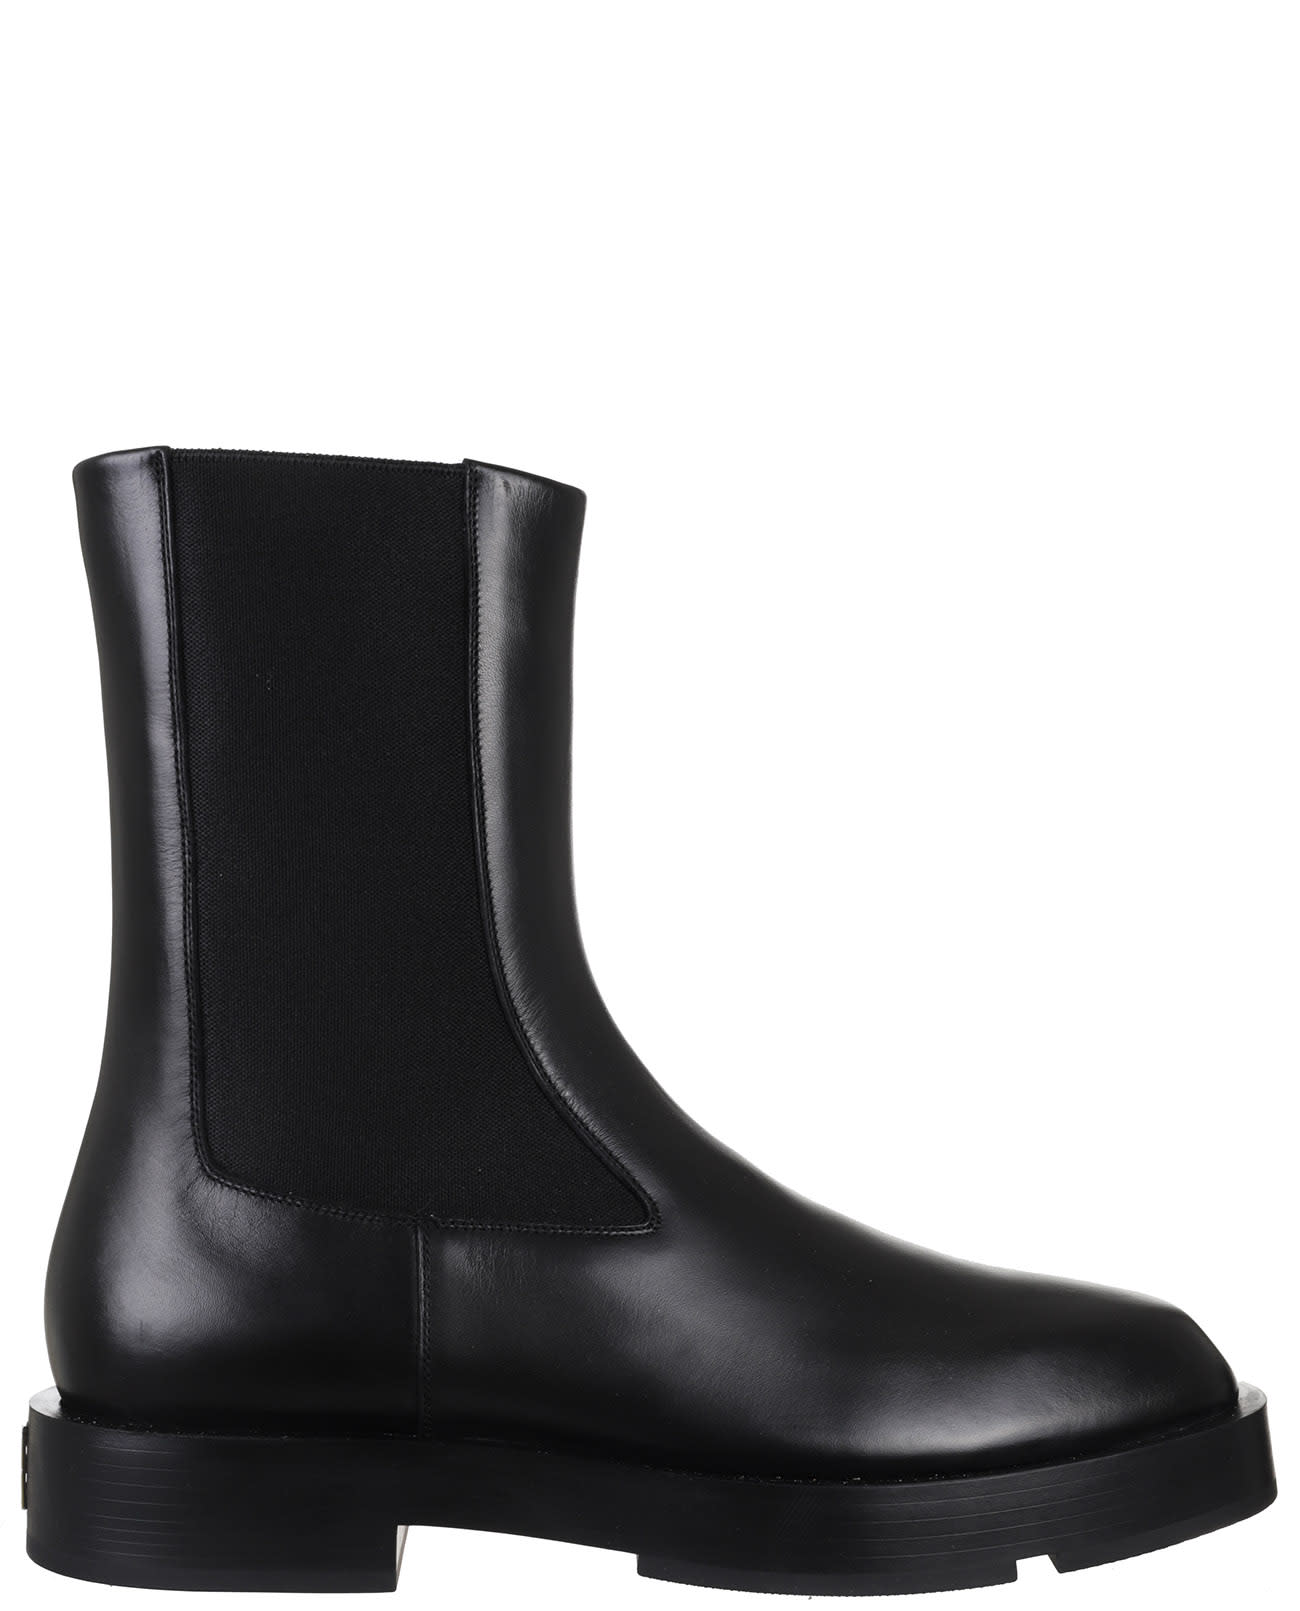 Givenchy Black Chelsea Boots